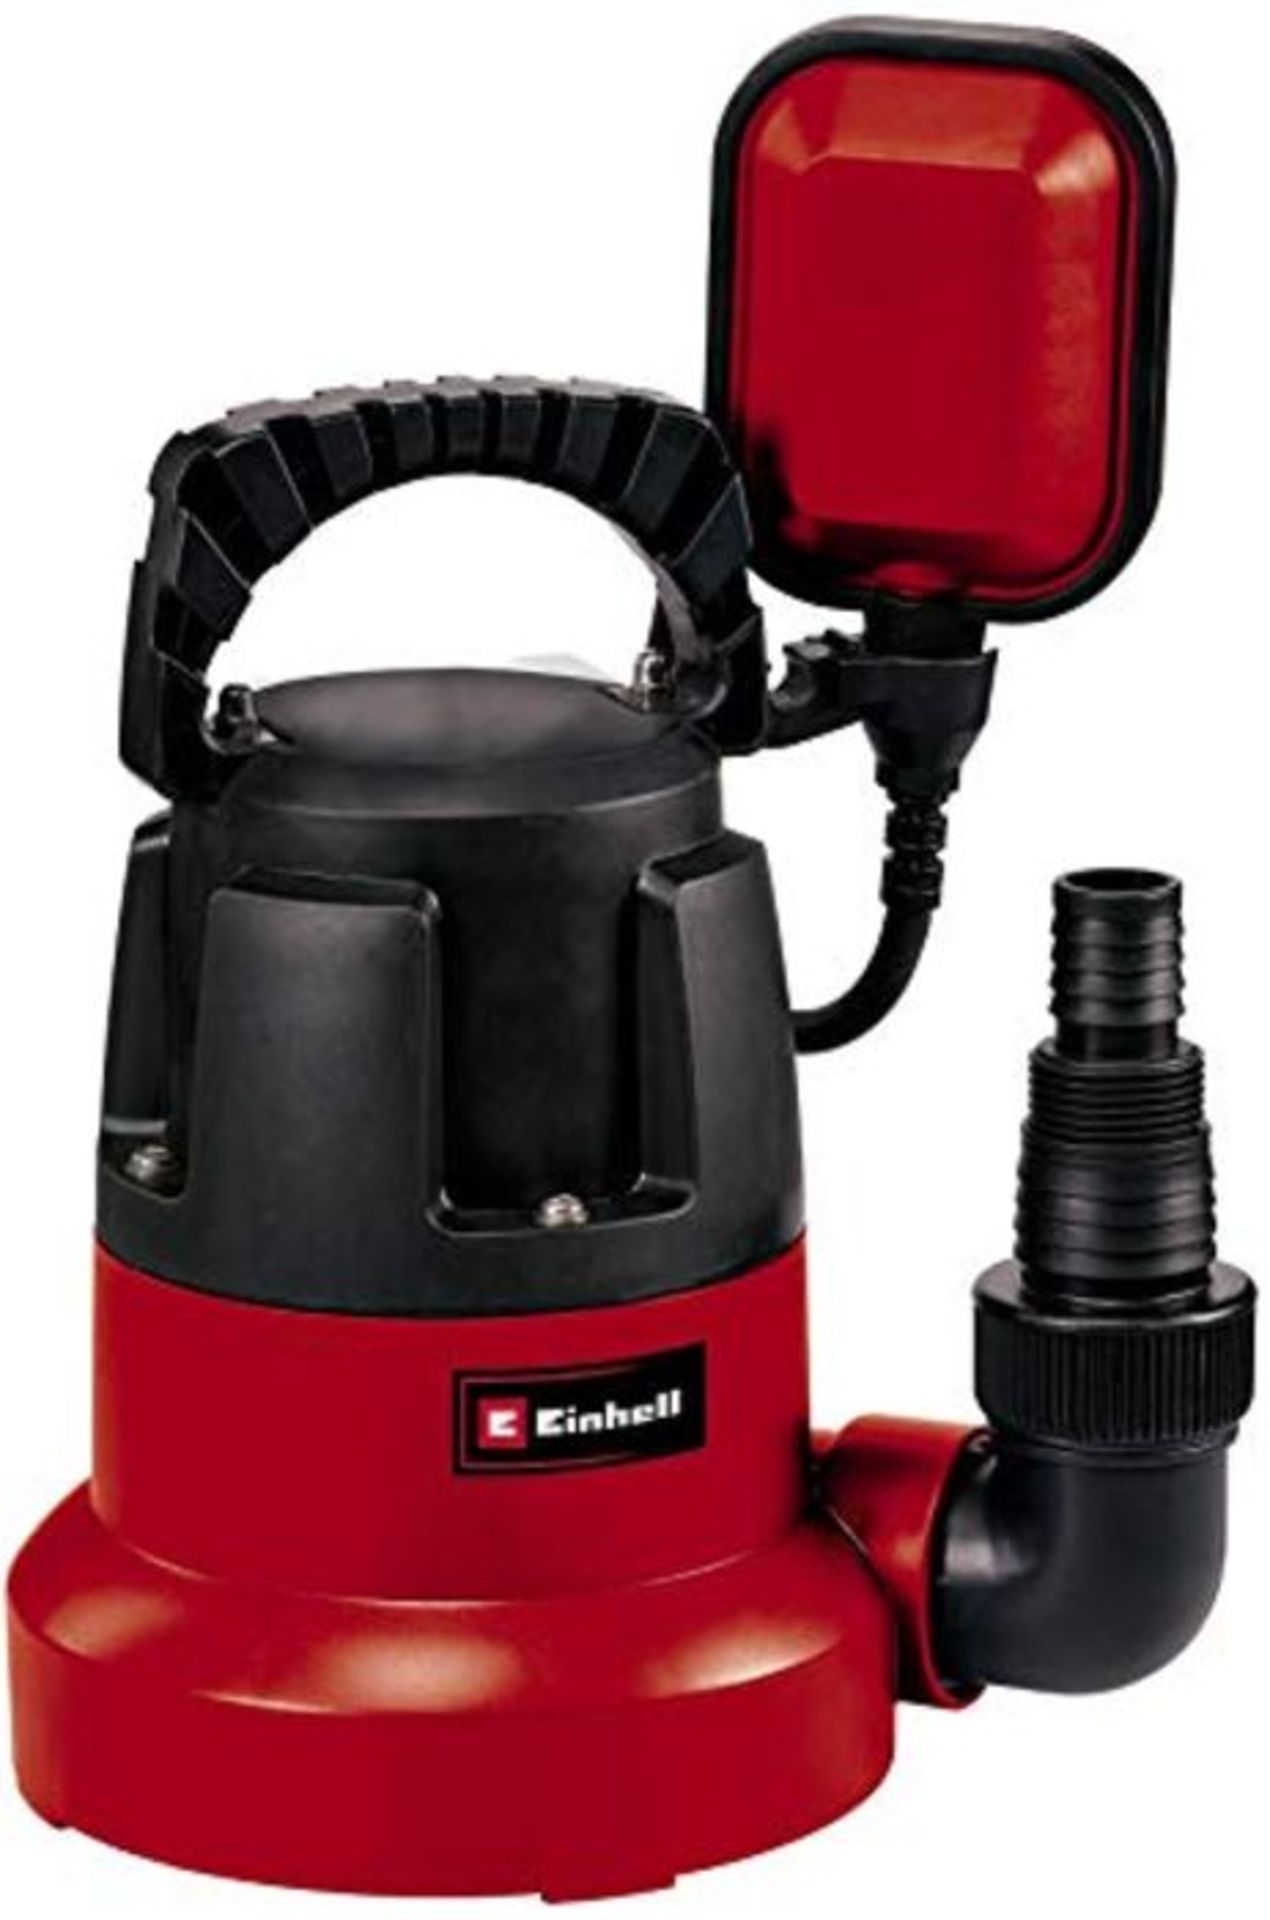 Einhell Submersible Pump GC-SP 3580 LL (350 W, 8000 L/H Extraction Down to 1 mm, Pump